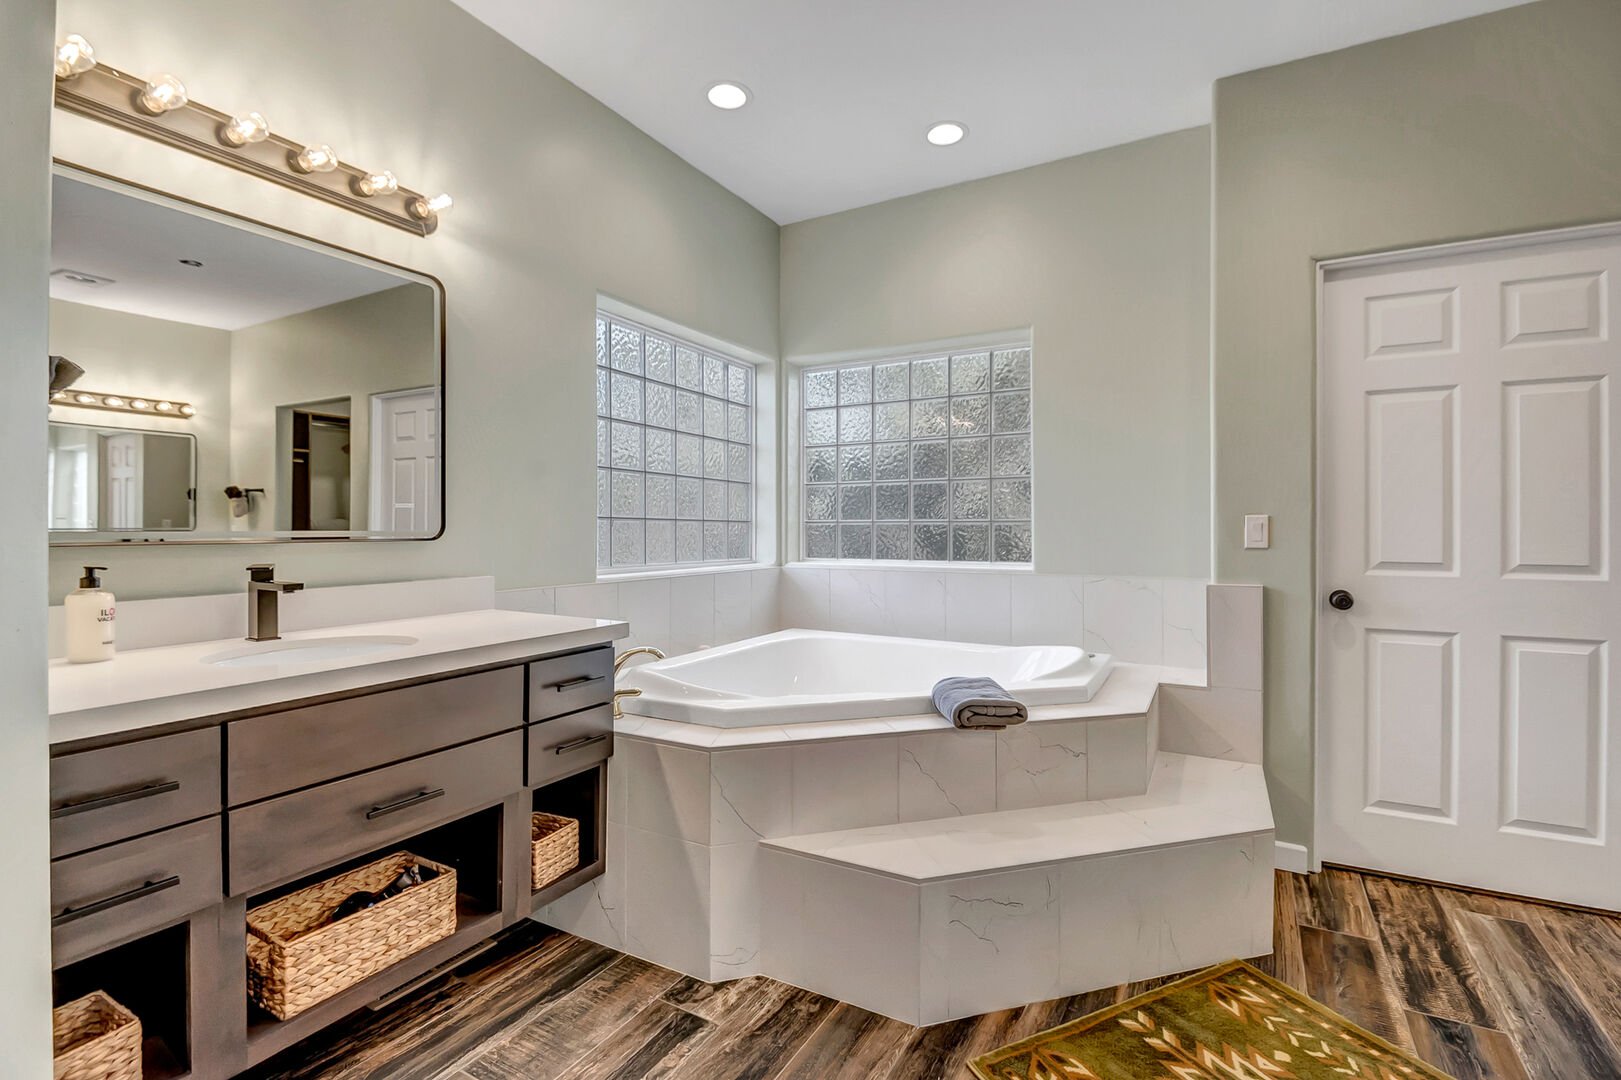 Master bathroom with two separate vanities, soaking tub, and separate walk-in shower